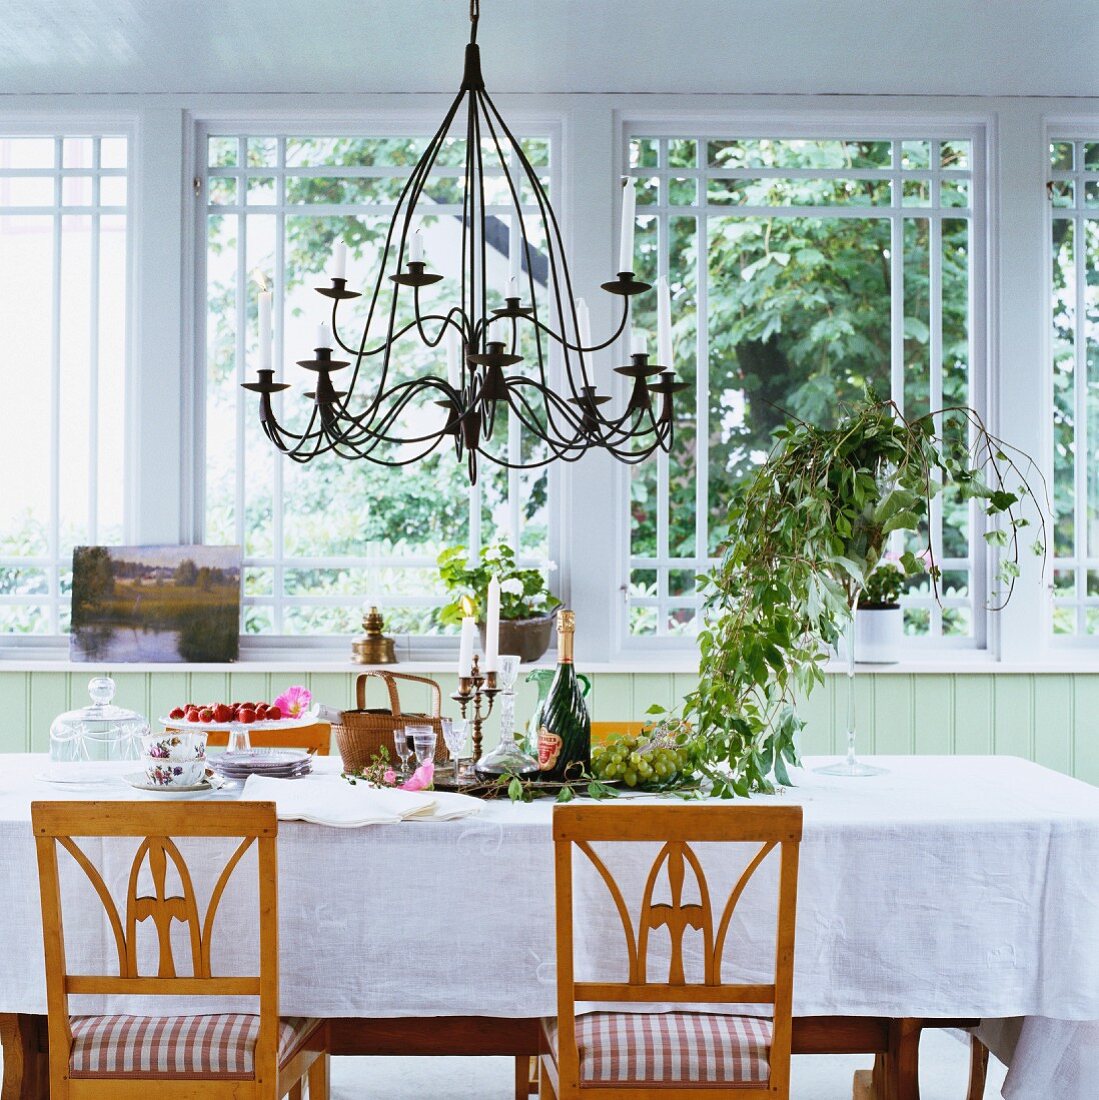 Biedermeier chairs at set table with white tablecloth in front of large window